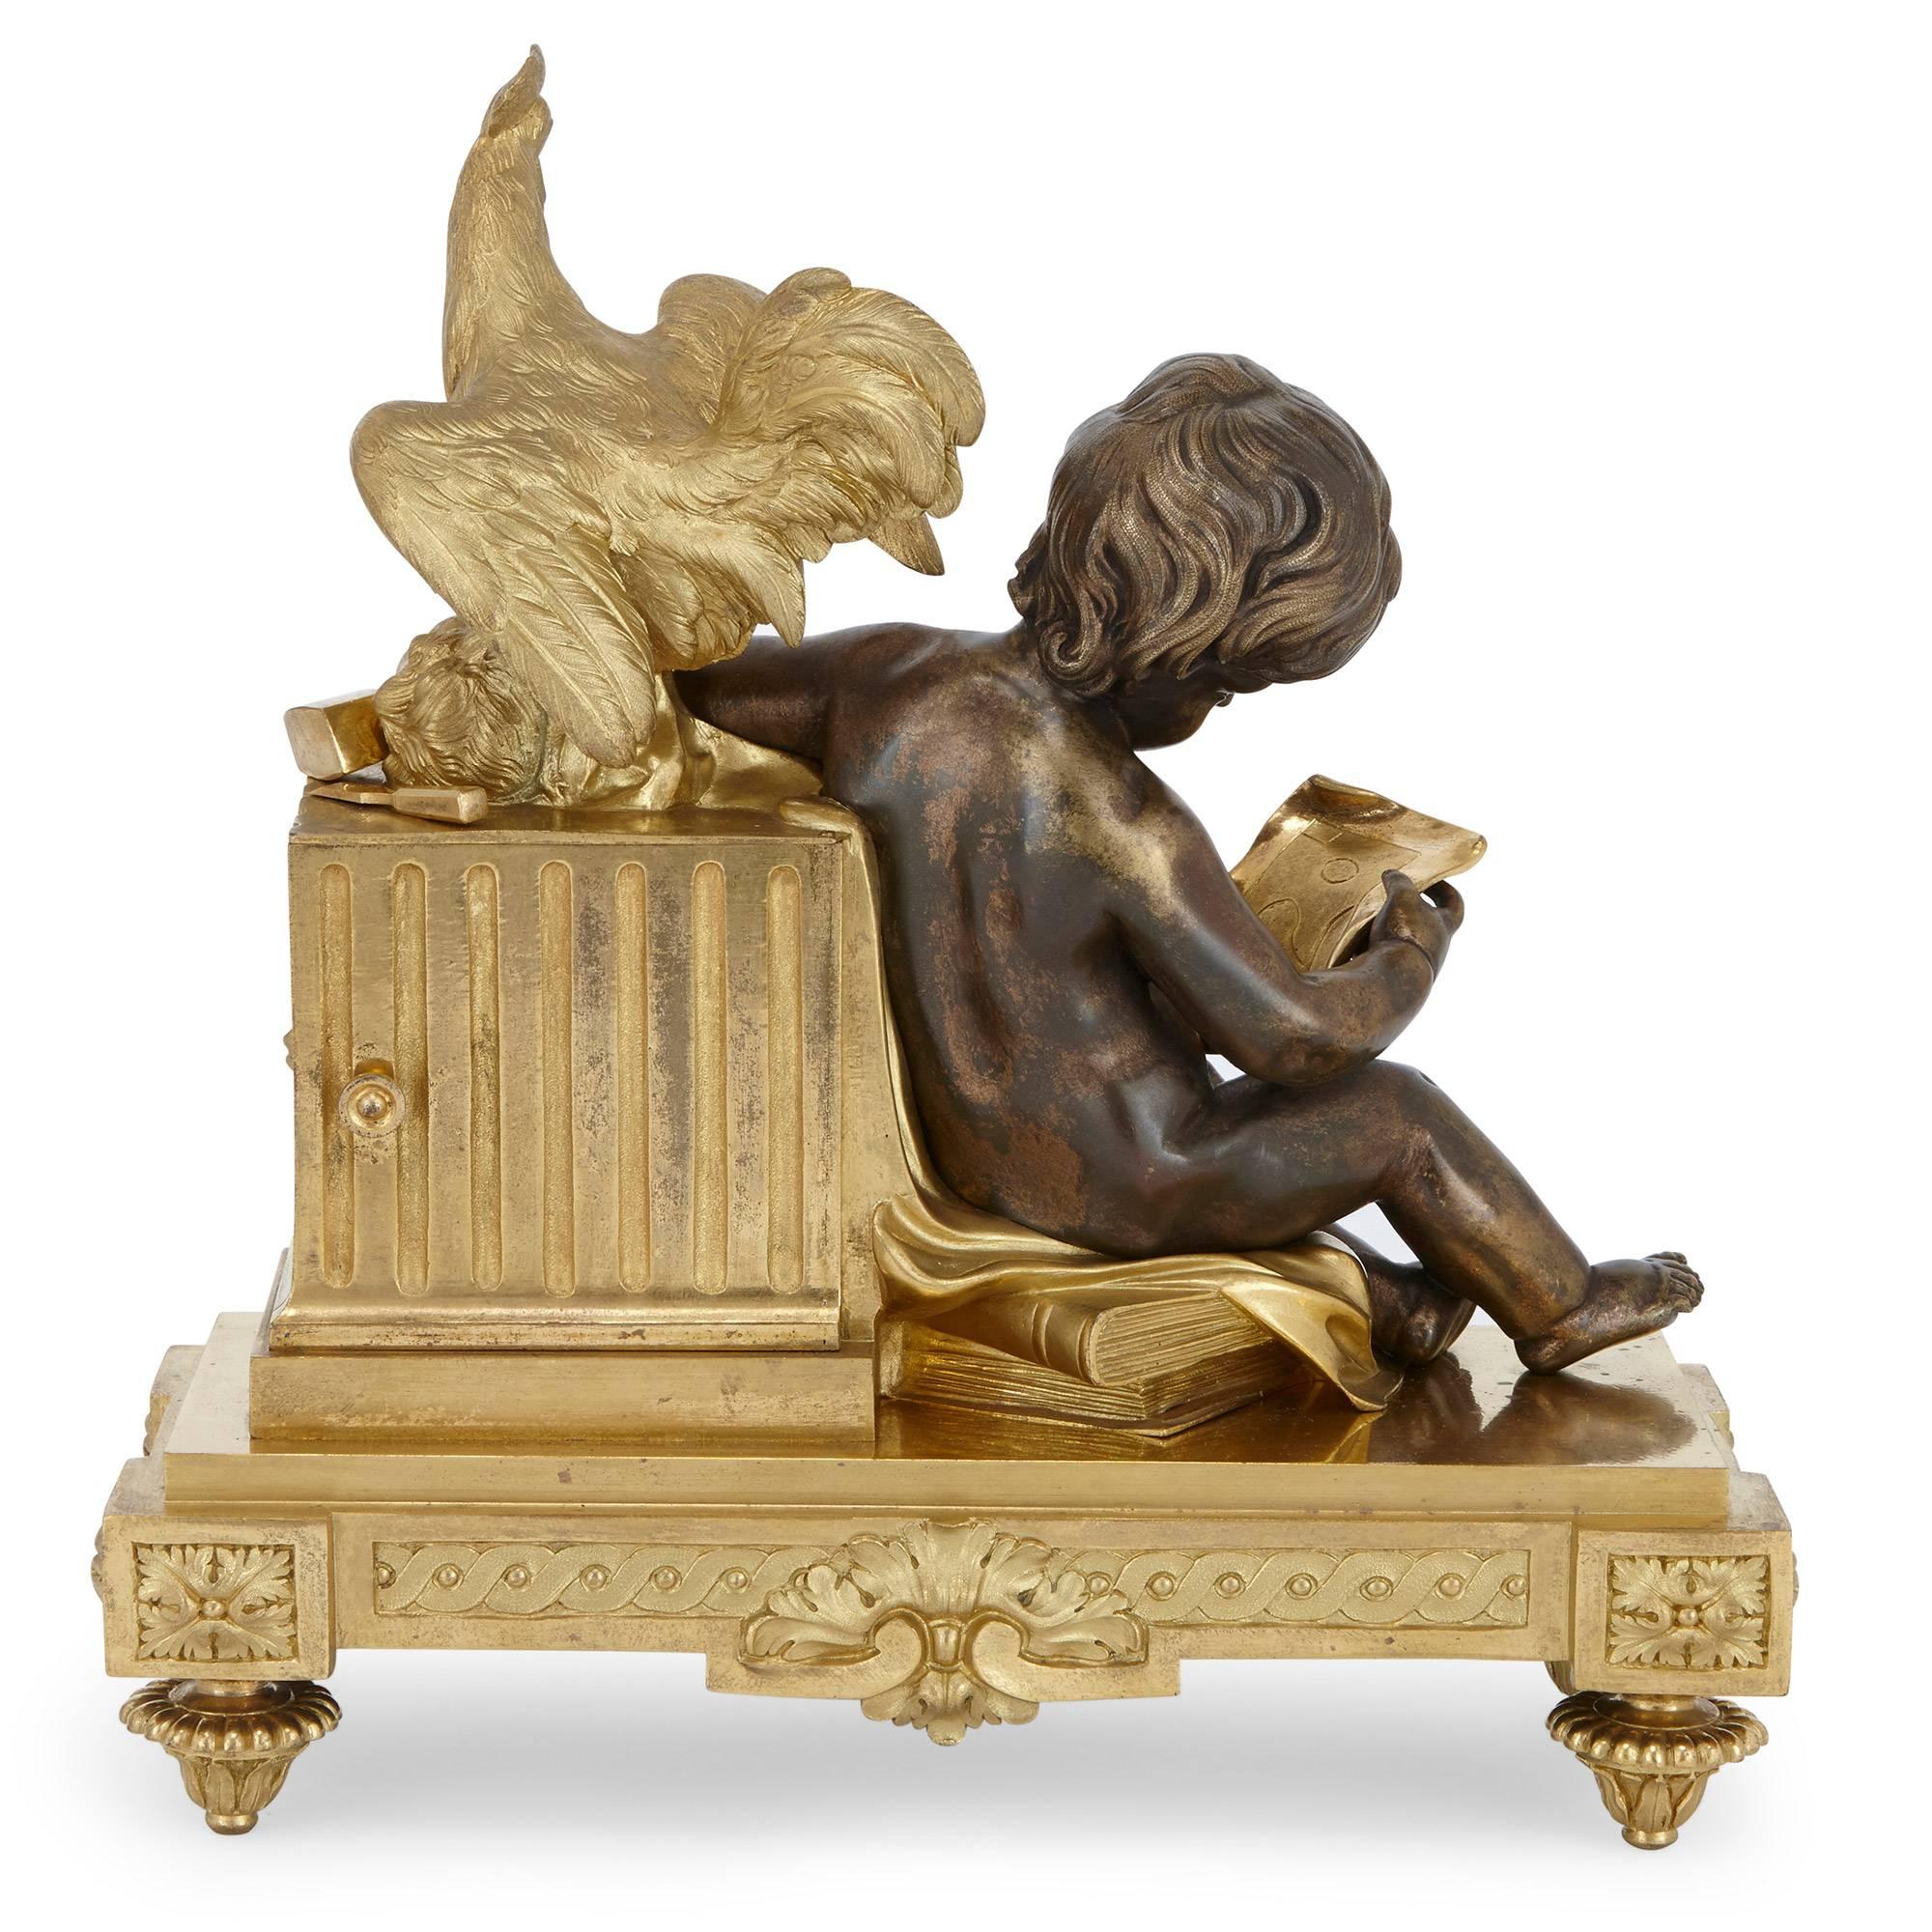 This charming antique French mantel clock is crafted by famous French maker, Alfred Beurdeley (1847-1919). The work is rendered in the elegant neoclassical style, modelled as a seated putto holding a paper who leans against a pedestal fronted by an